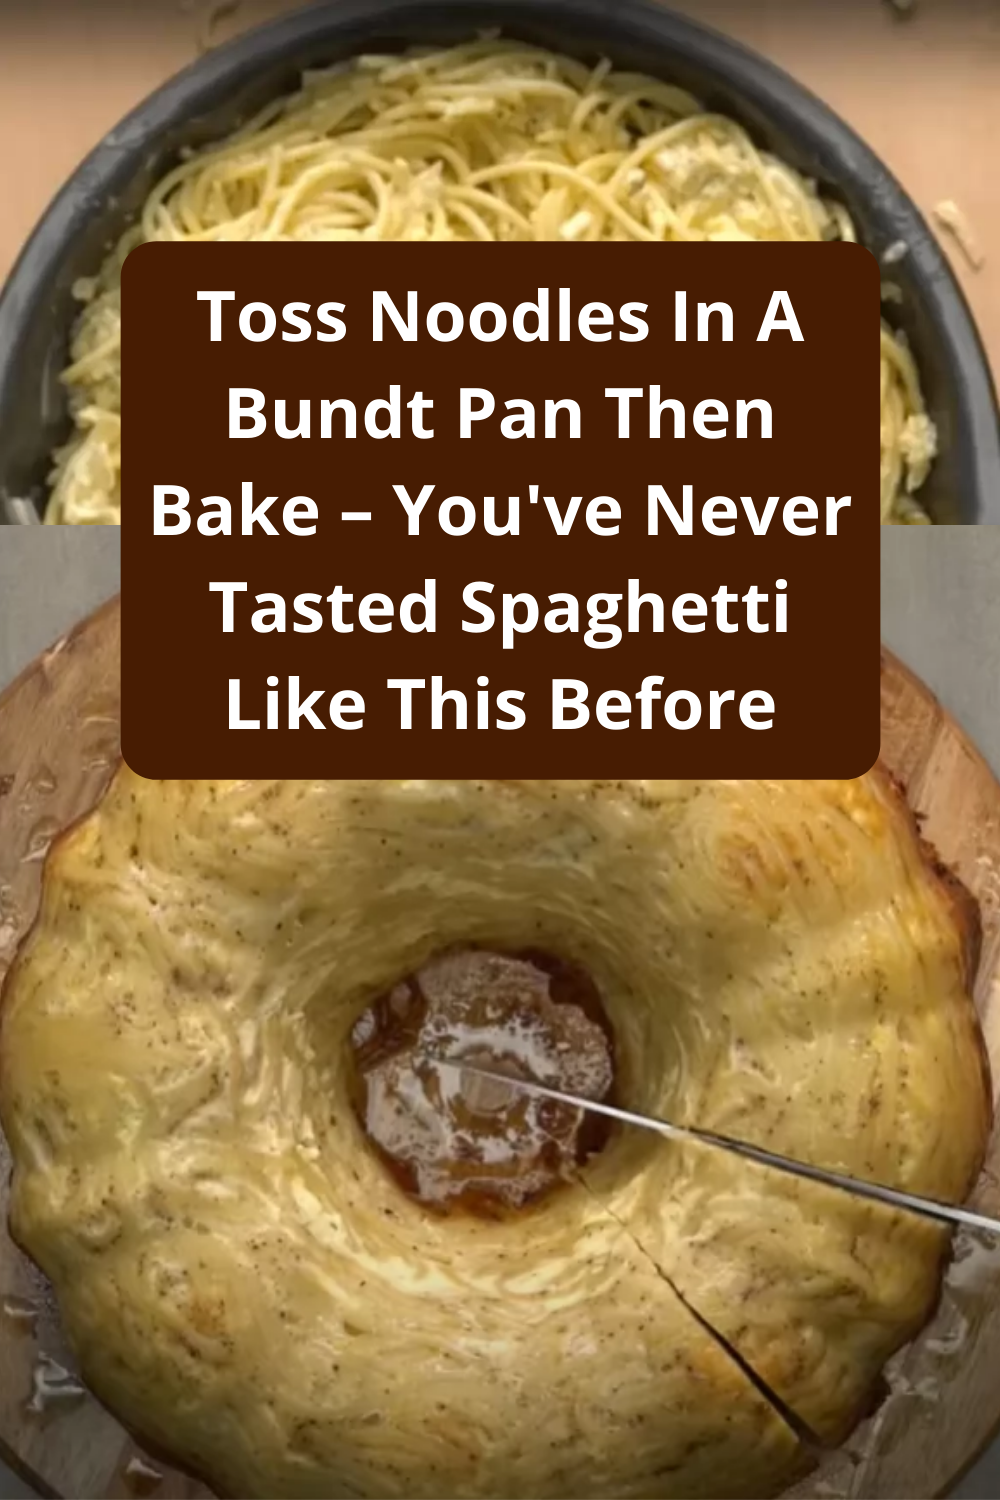 Toss Noodles In A Bundt Pan Then Bake – You've Never Tasted Spaghetti Like This Before